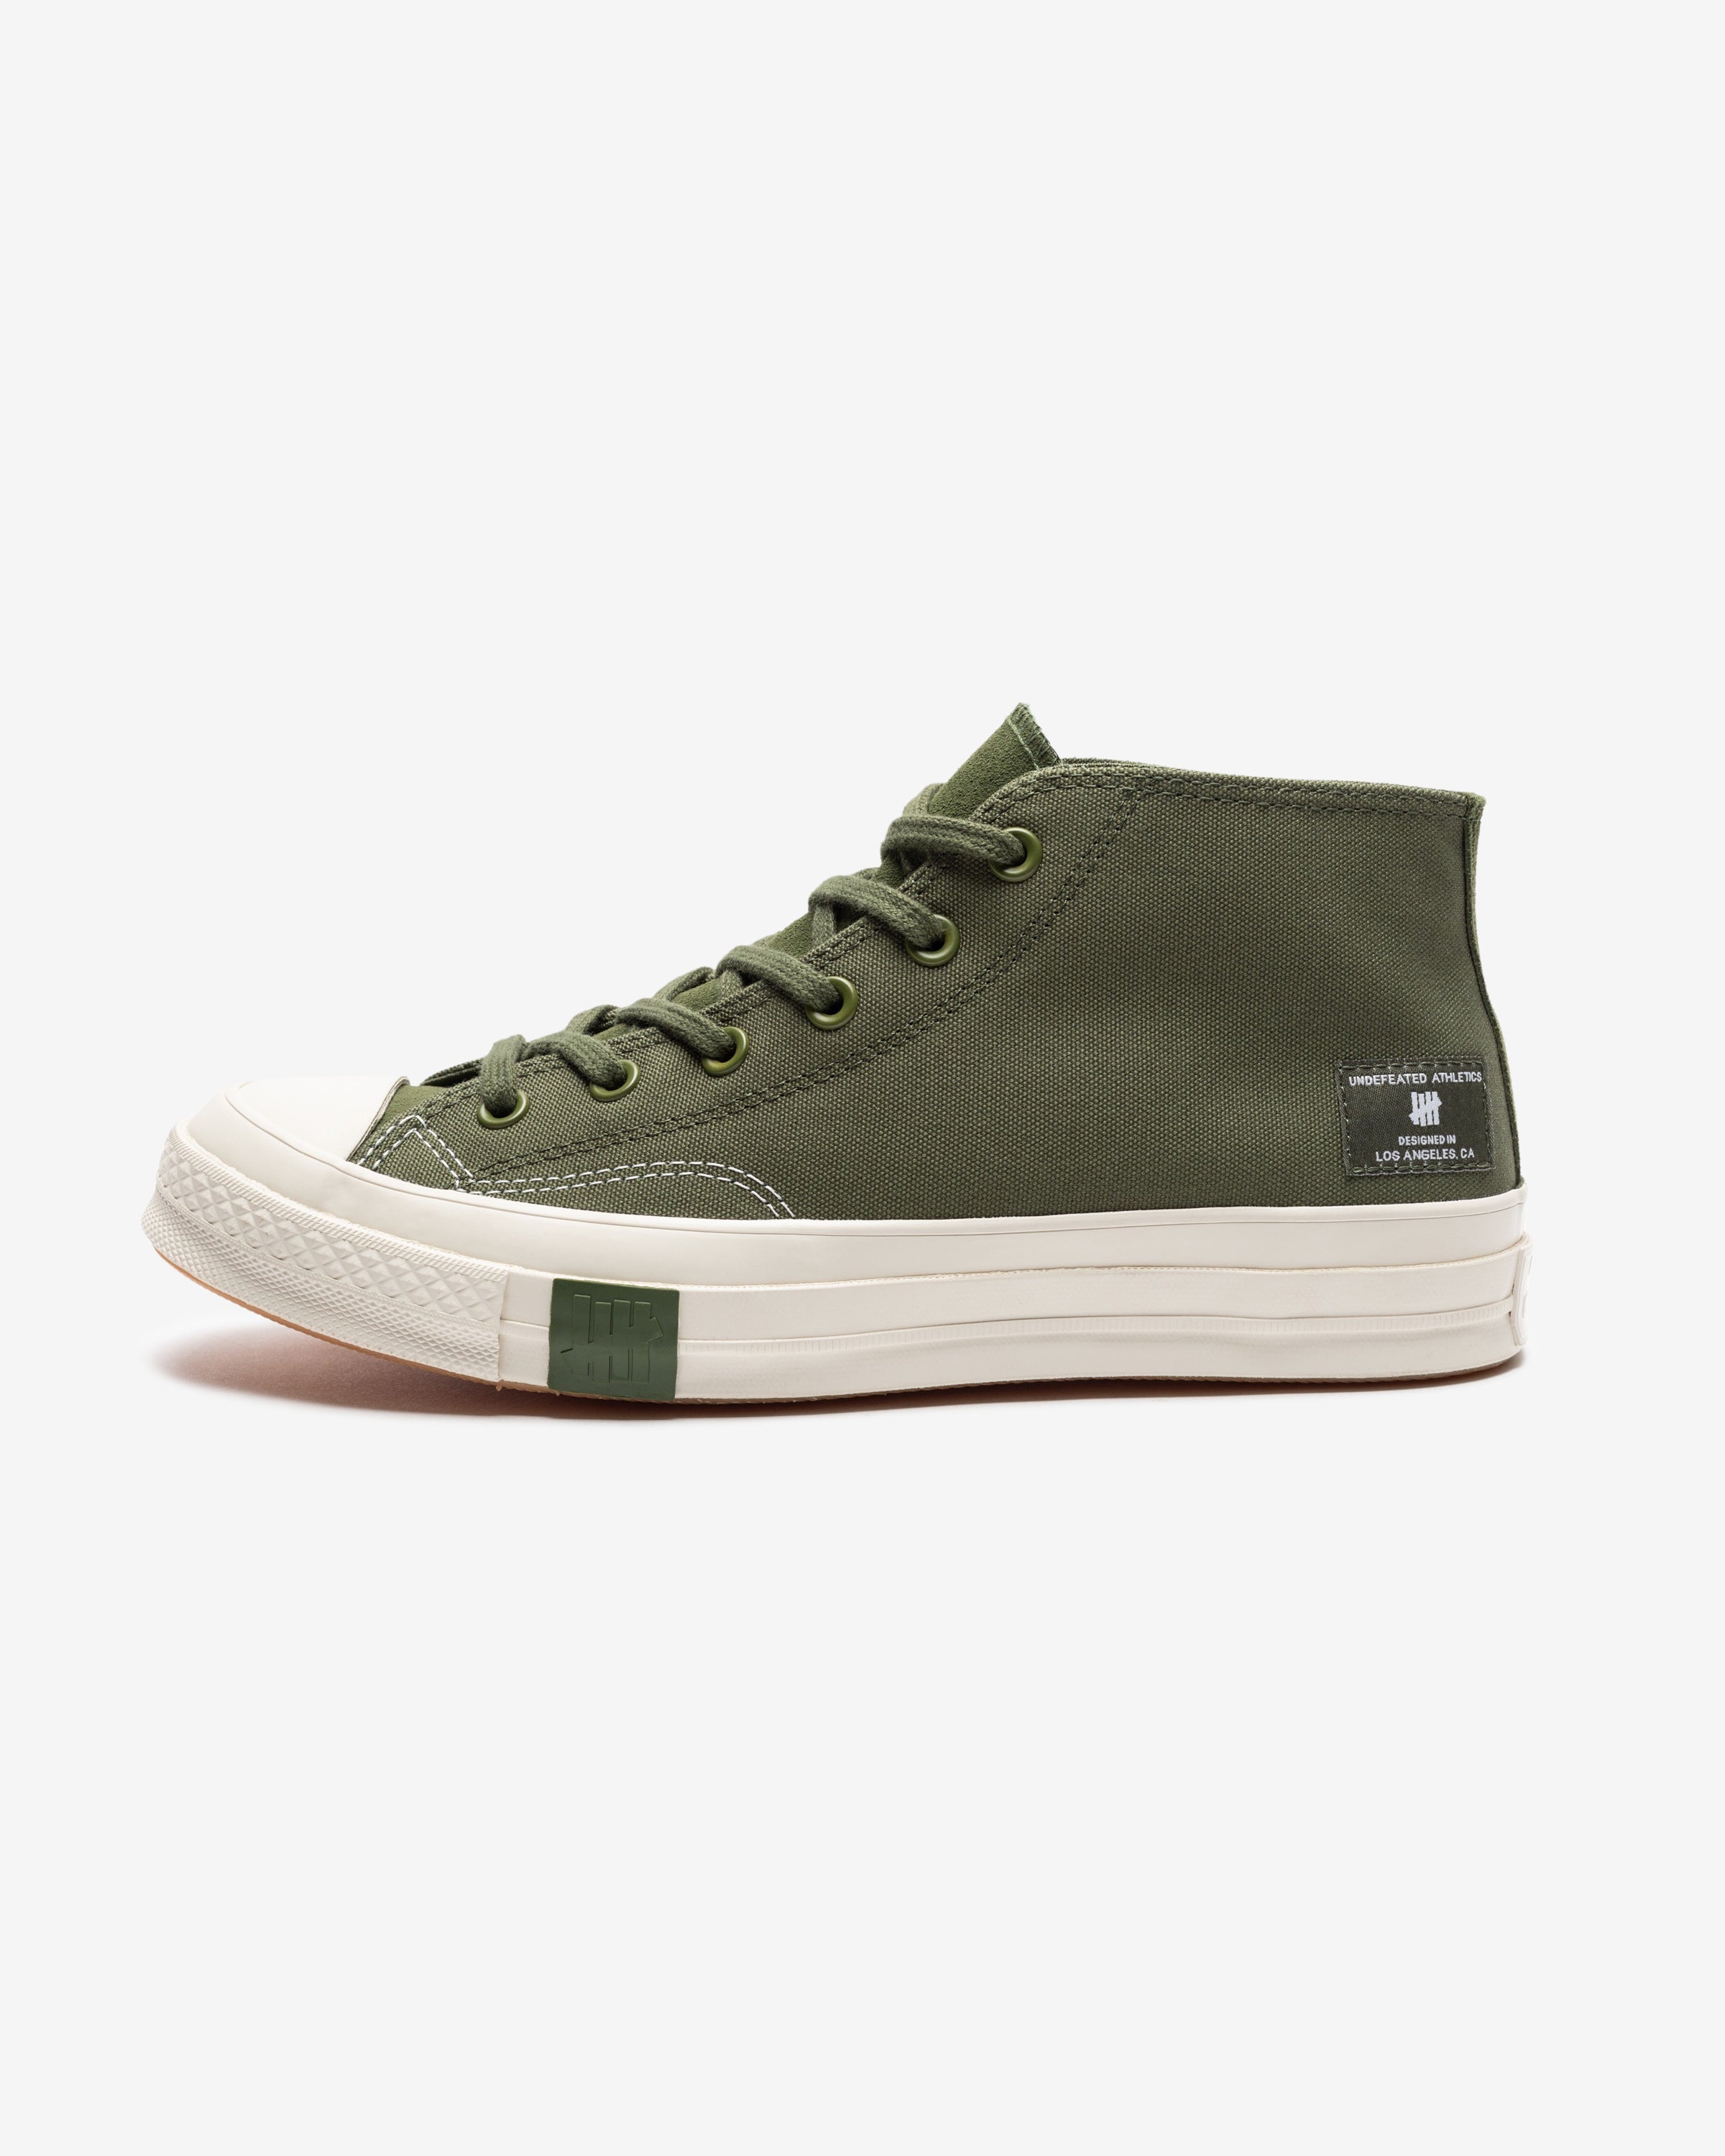 módulo arbusto Ten cuidado CONVERSE X UNDEFEATED CHUCK 70 MID - CHIVE/ PARCHMENT – Undefeated